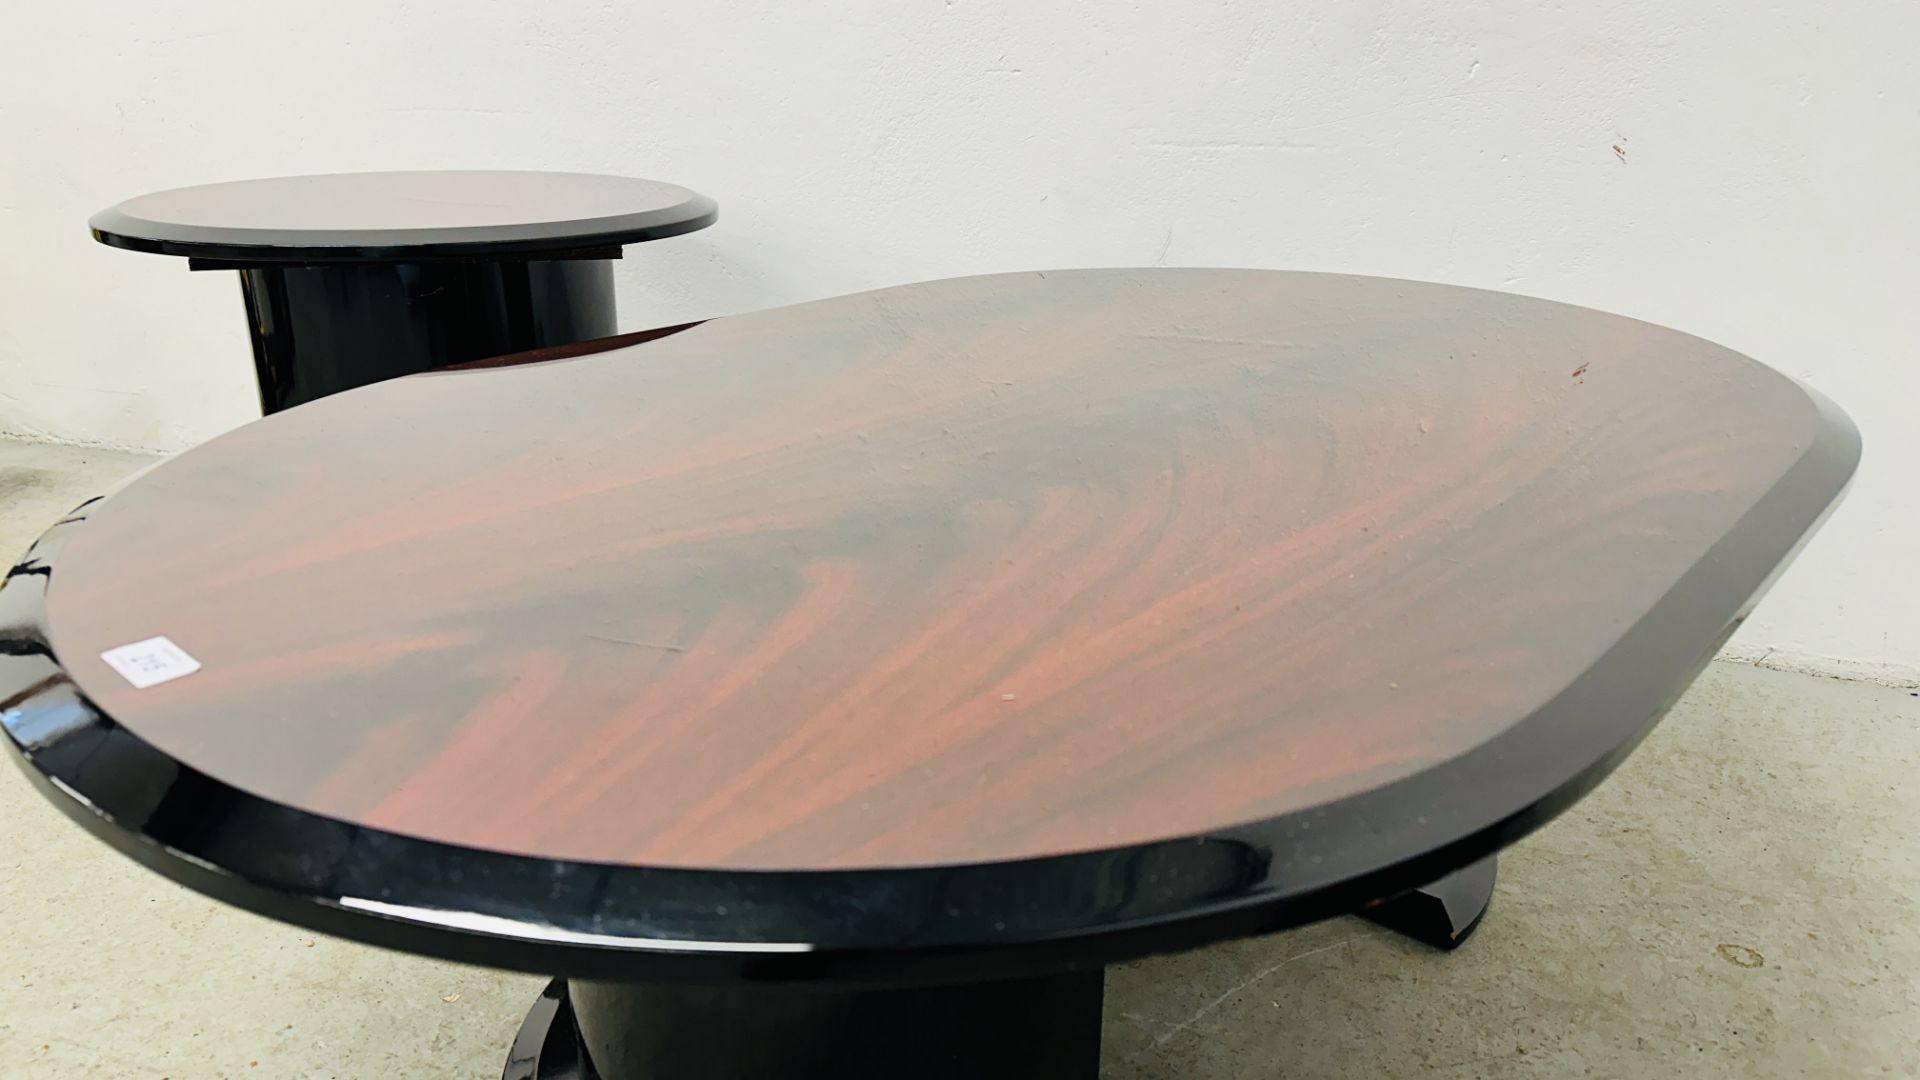 3 MATCHING DESIGN HIGH GLOSS MAHOGANY FINISH COFFEE TABLES INCLUDING A PAIR OF CIRCULAR AND 1 OVAL. - Image 14 of 16